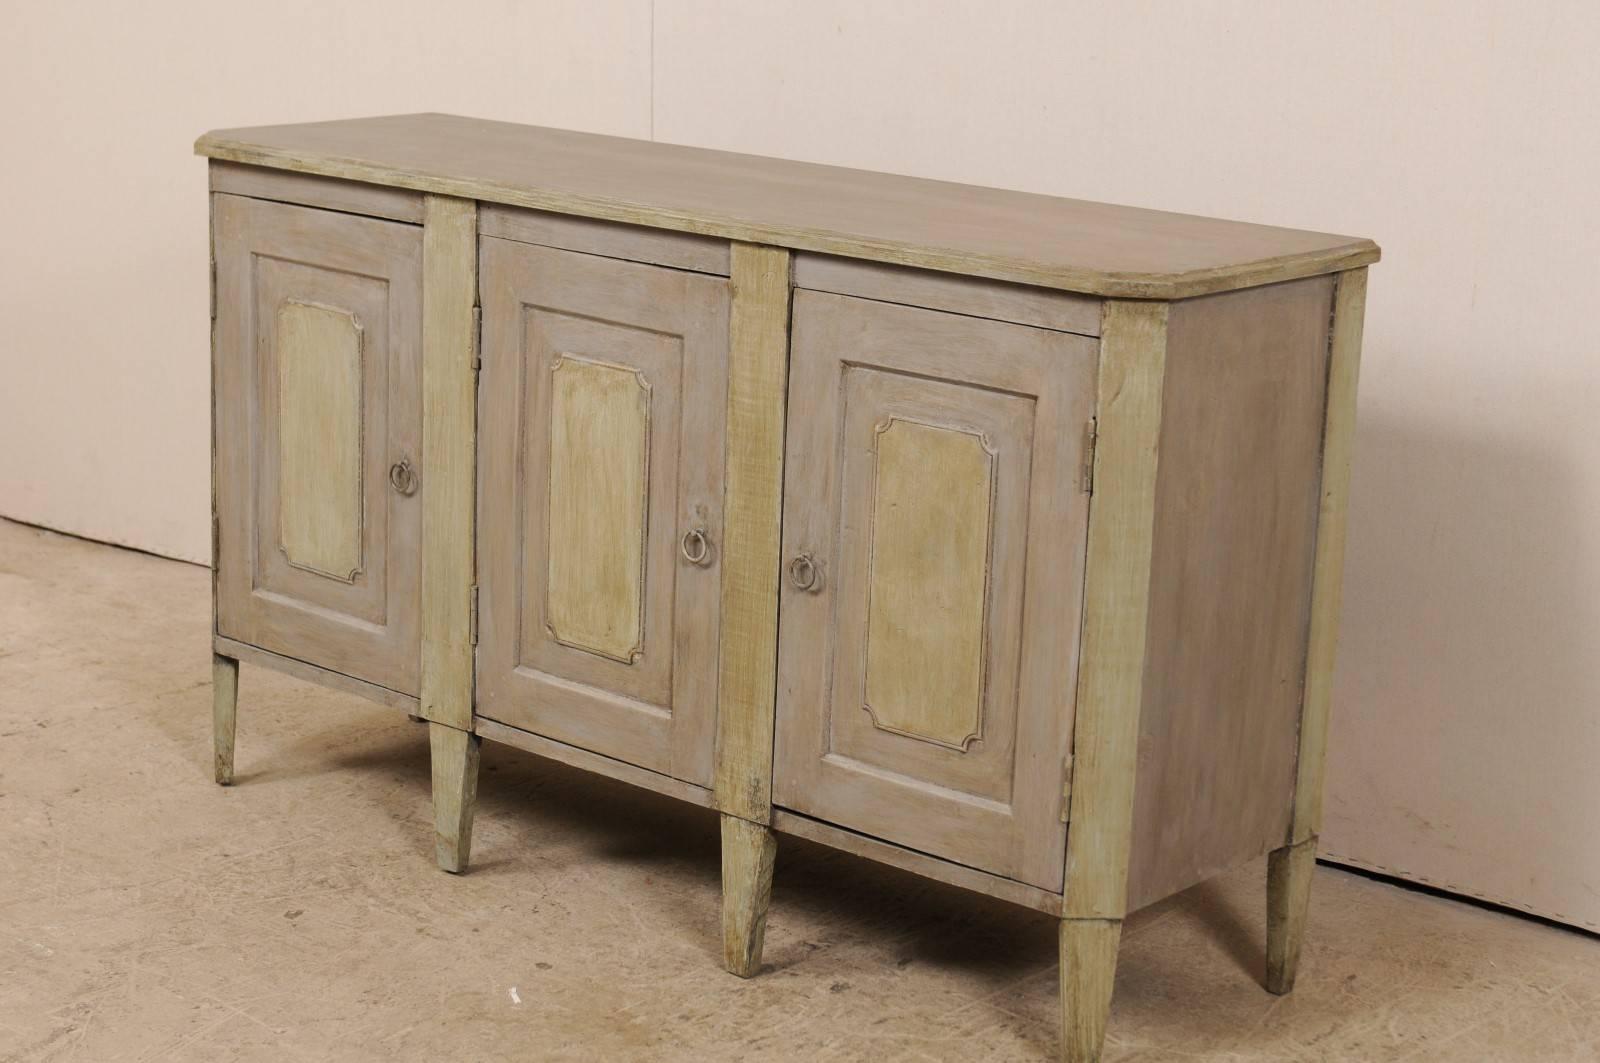 American Vintage Painted Wood Buffet Sideboard Cabinet in Grey with Soft Green Accents